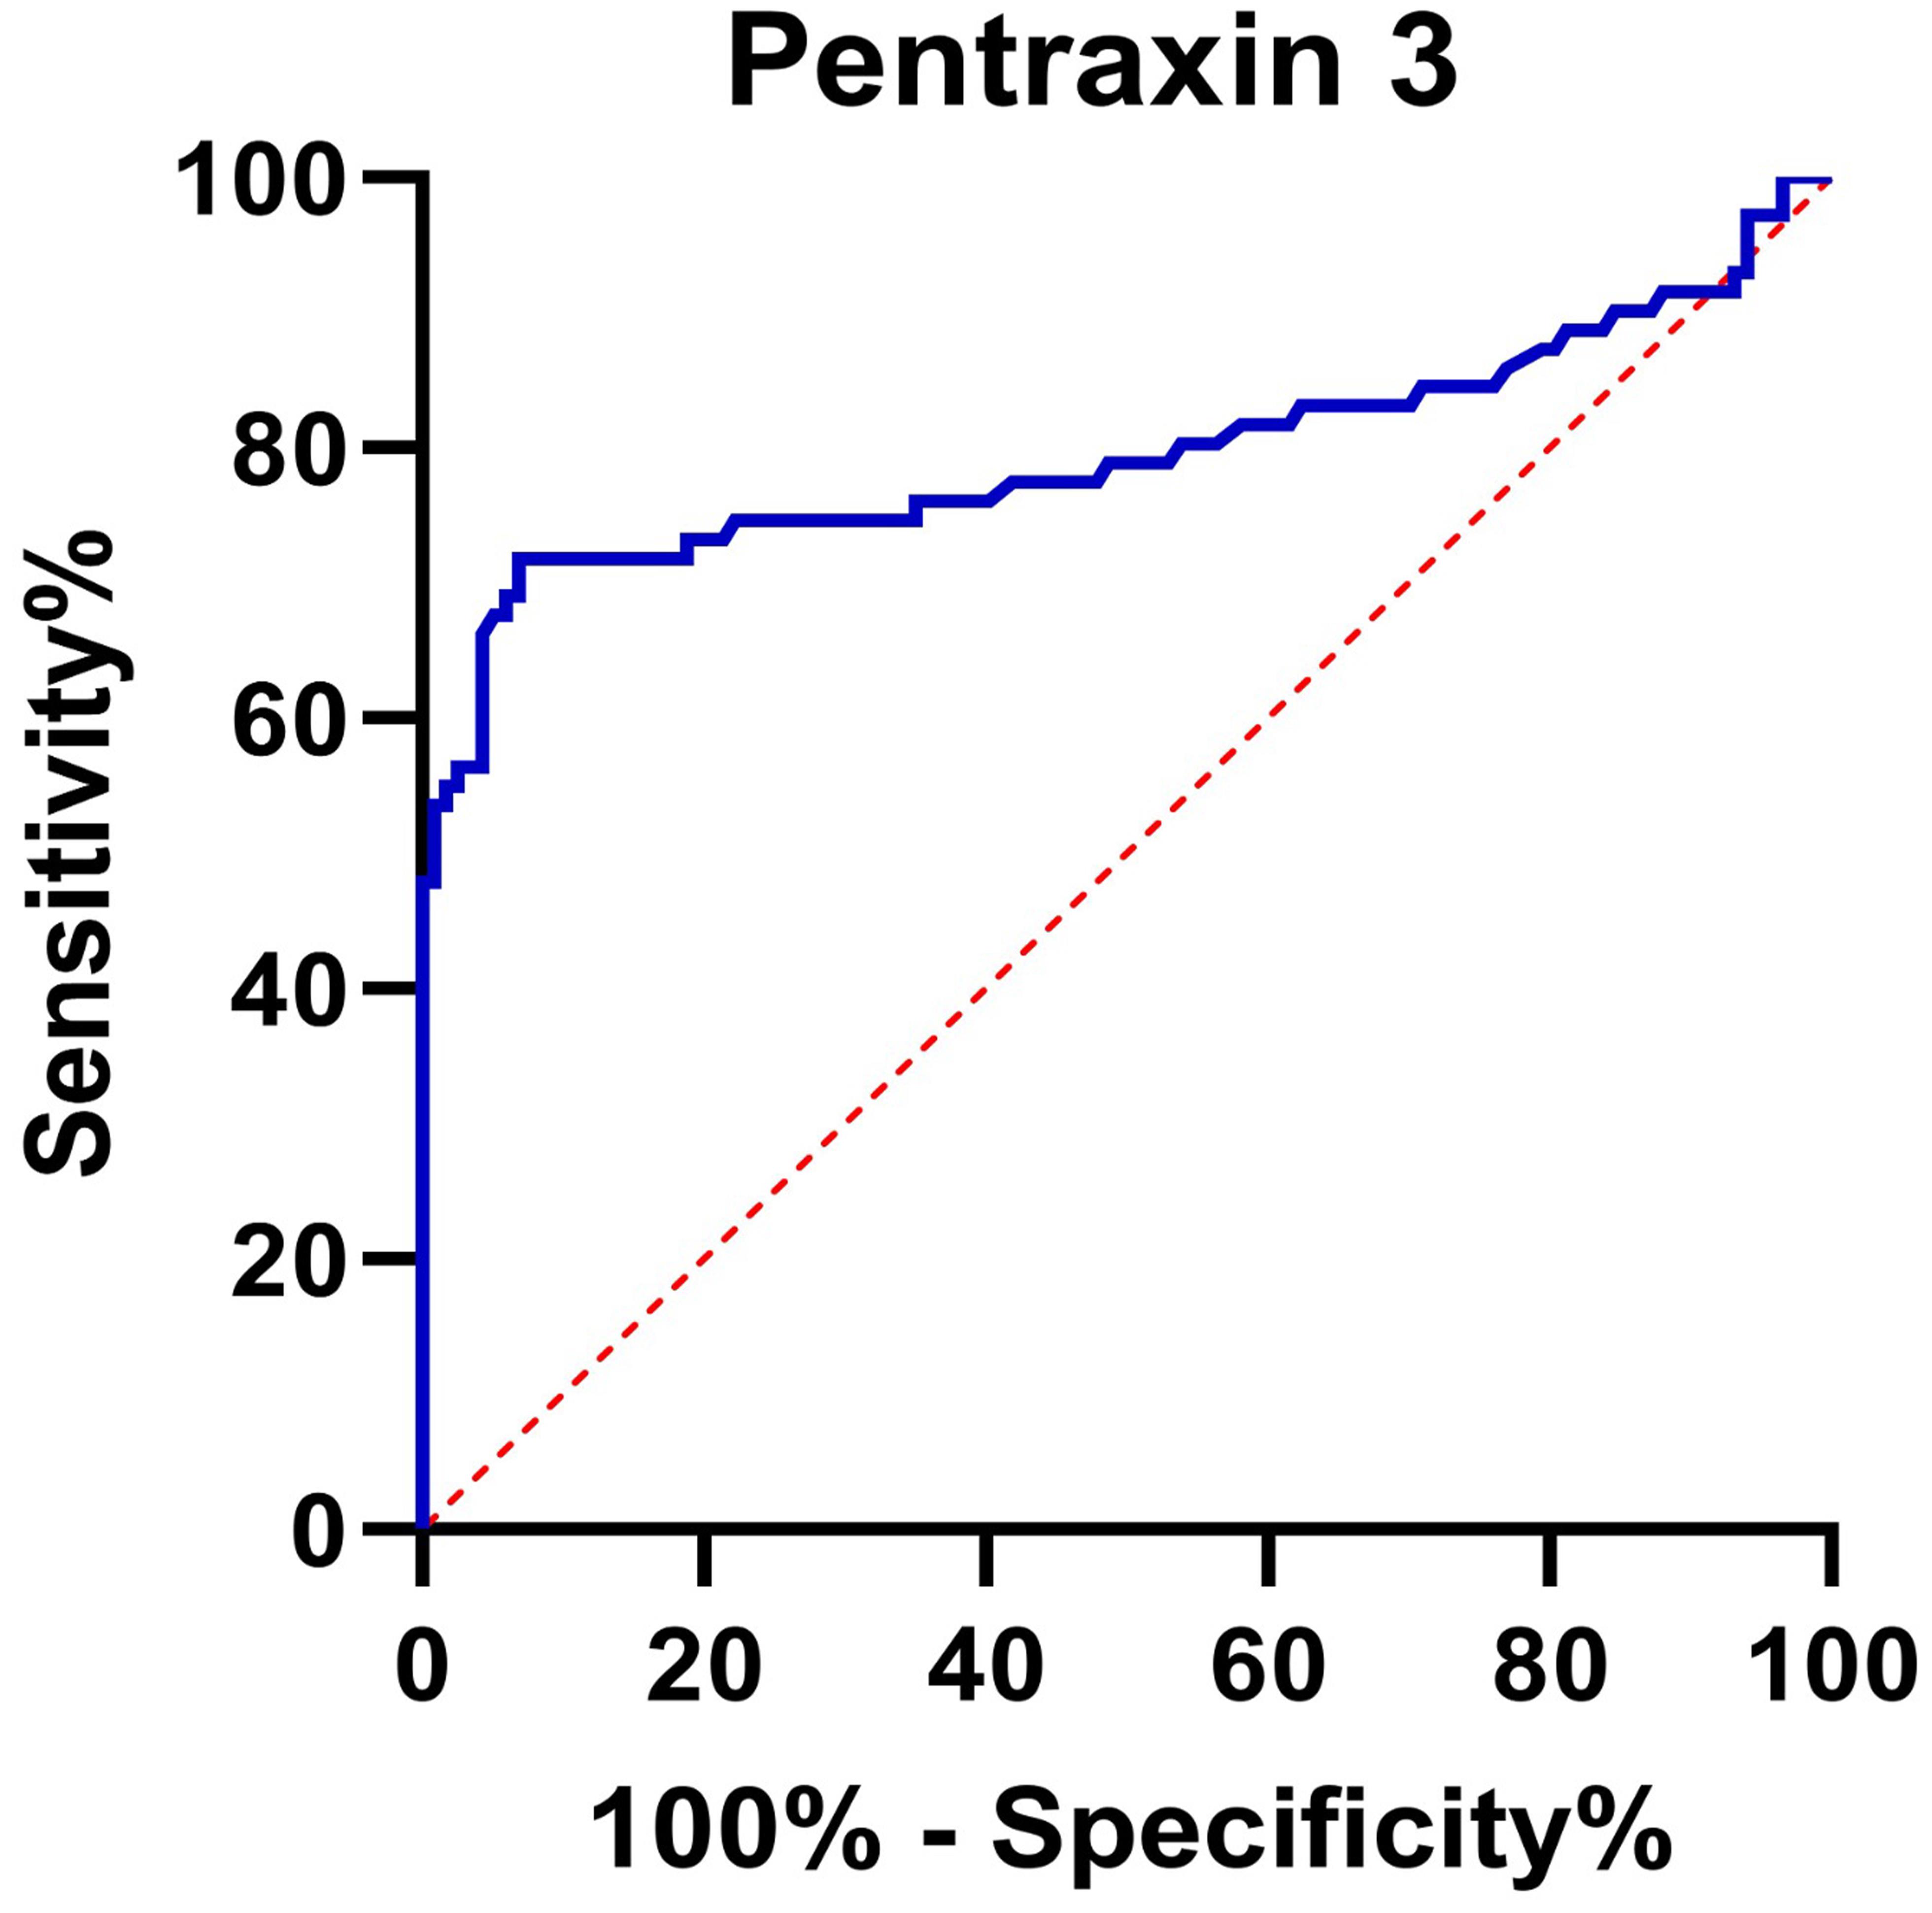 The serum level of PTX3 in patients with no or mild fibrosis versus patients with severe fibrosis.